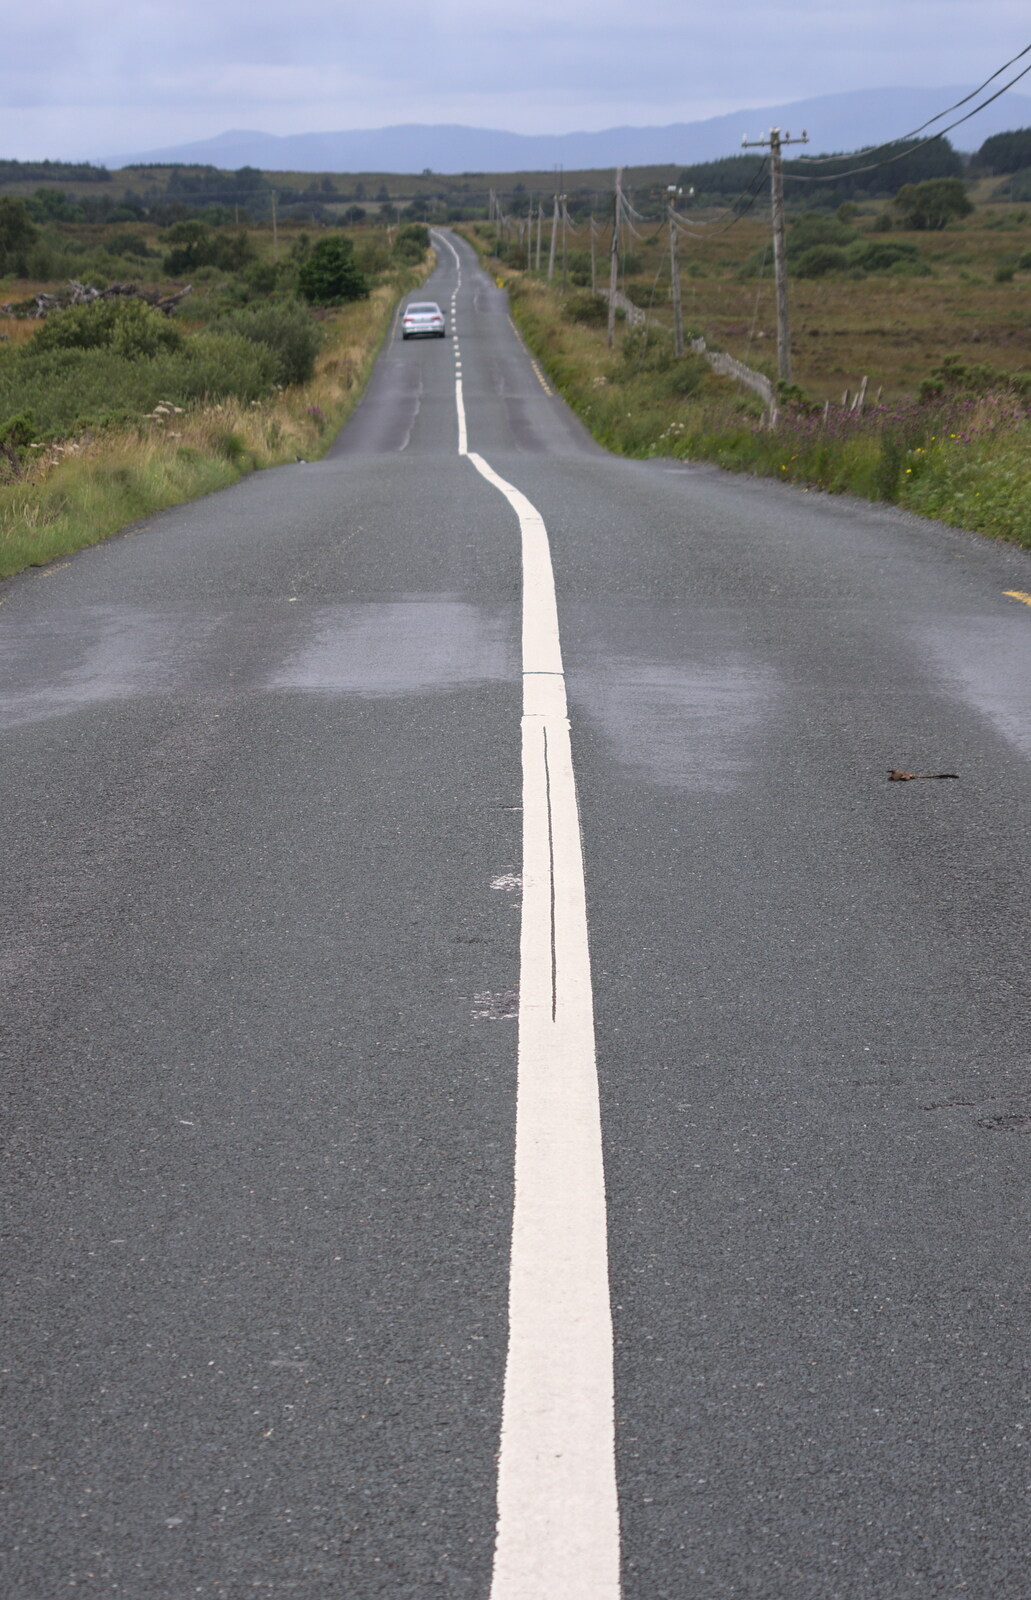 Vanishing-point highway near Newport from From Achill to Strokestown, Mayo and Roscommon, Ireland - 10th August 2017